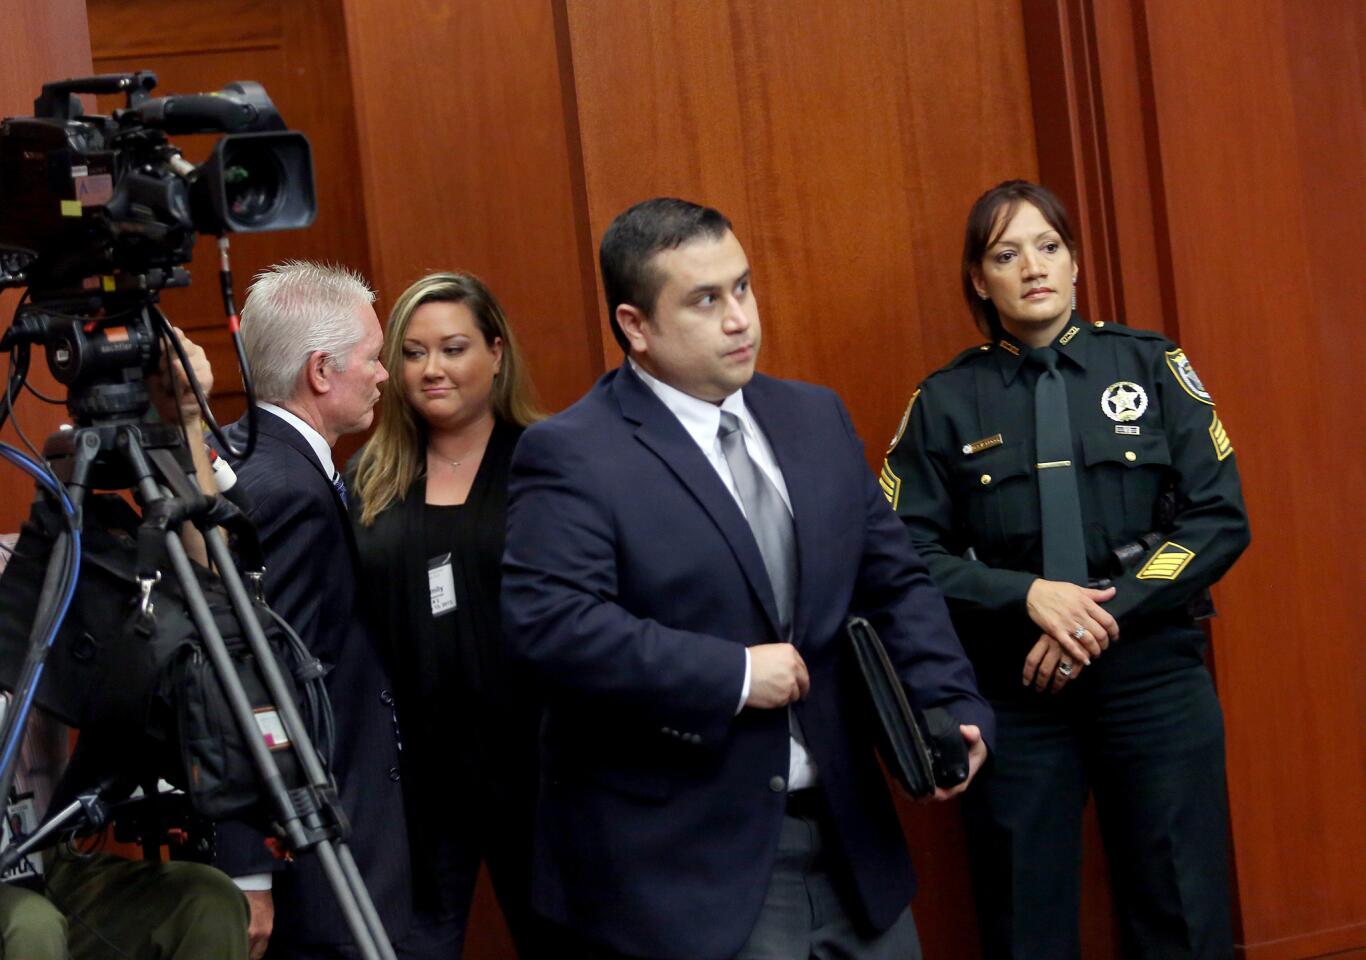 Shellie Zimmerman and her husband George Zimmerman enter the courtroom after a recess in the afternoon in Seminole circuit court on the 4th day of George Zimmerman's trial, in Sanford, Fla., Thursday, June 13, 2013. Zimmerman is accused in the fatal shooting of Trayvon Martin. (Jacob Langston/Orlando Sentinel/POOL)